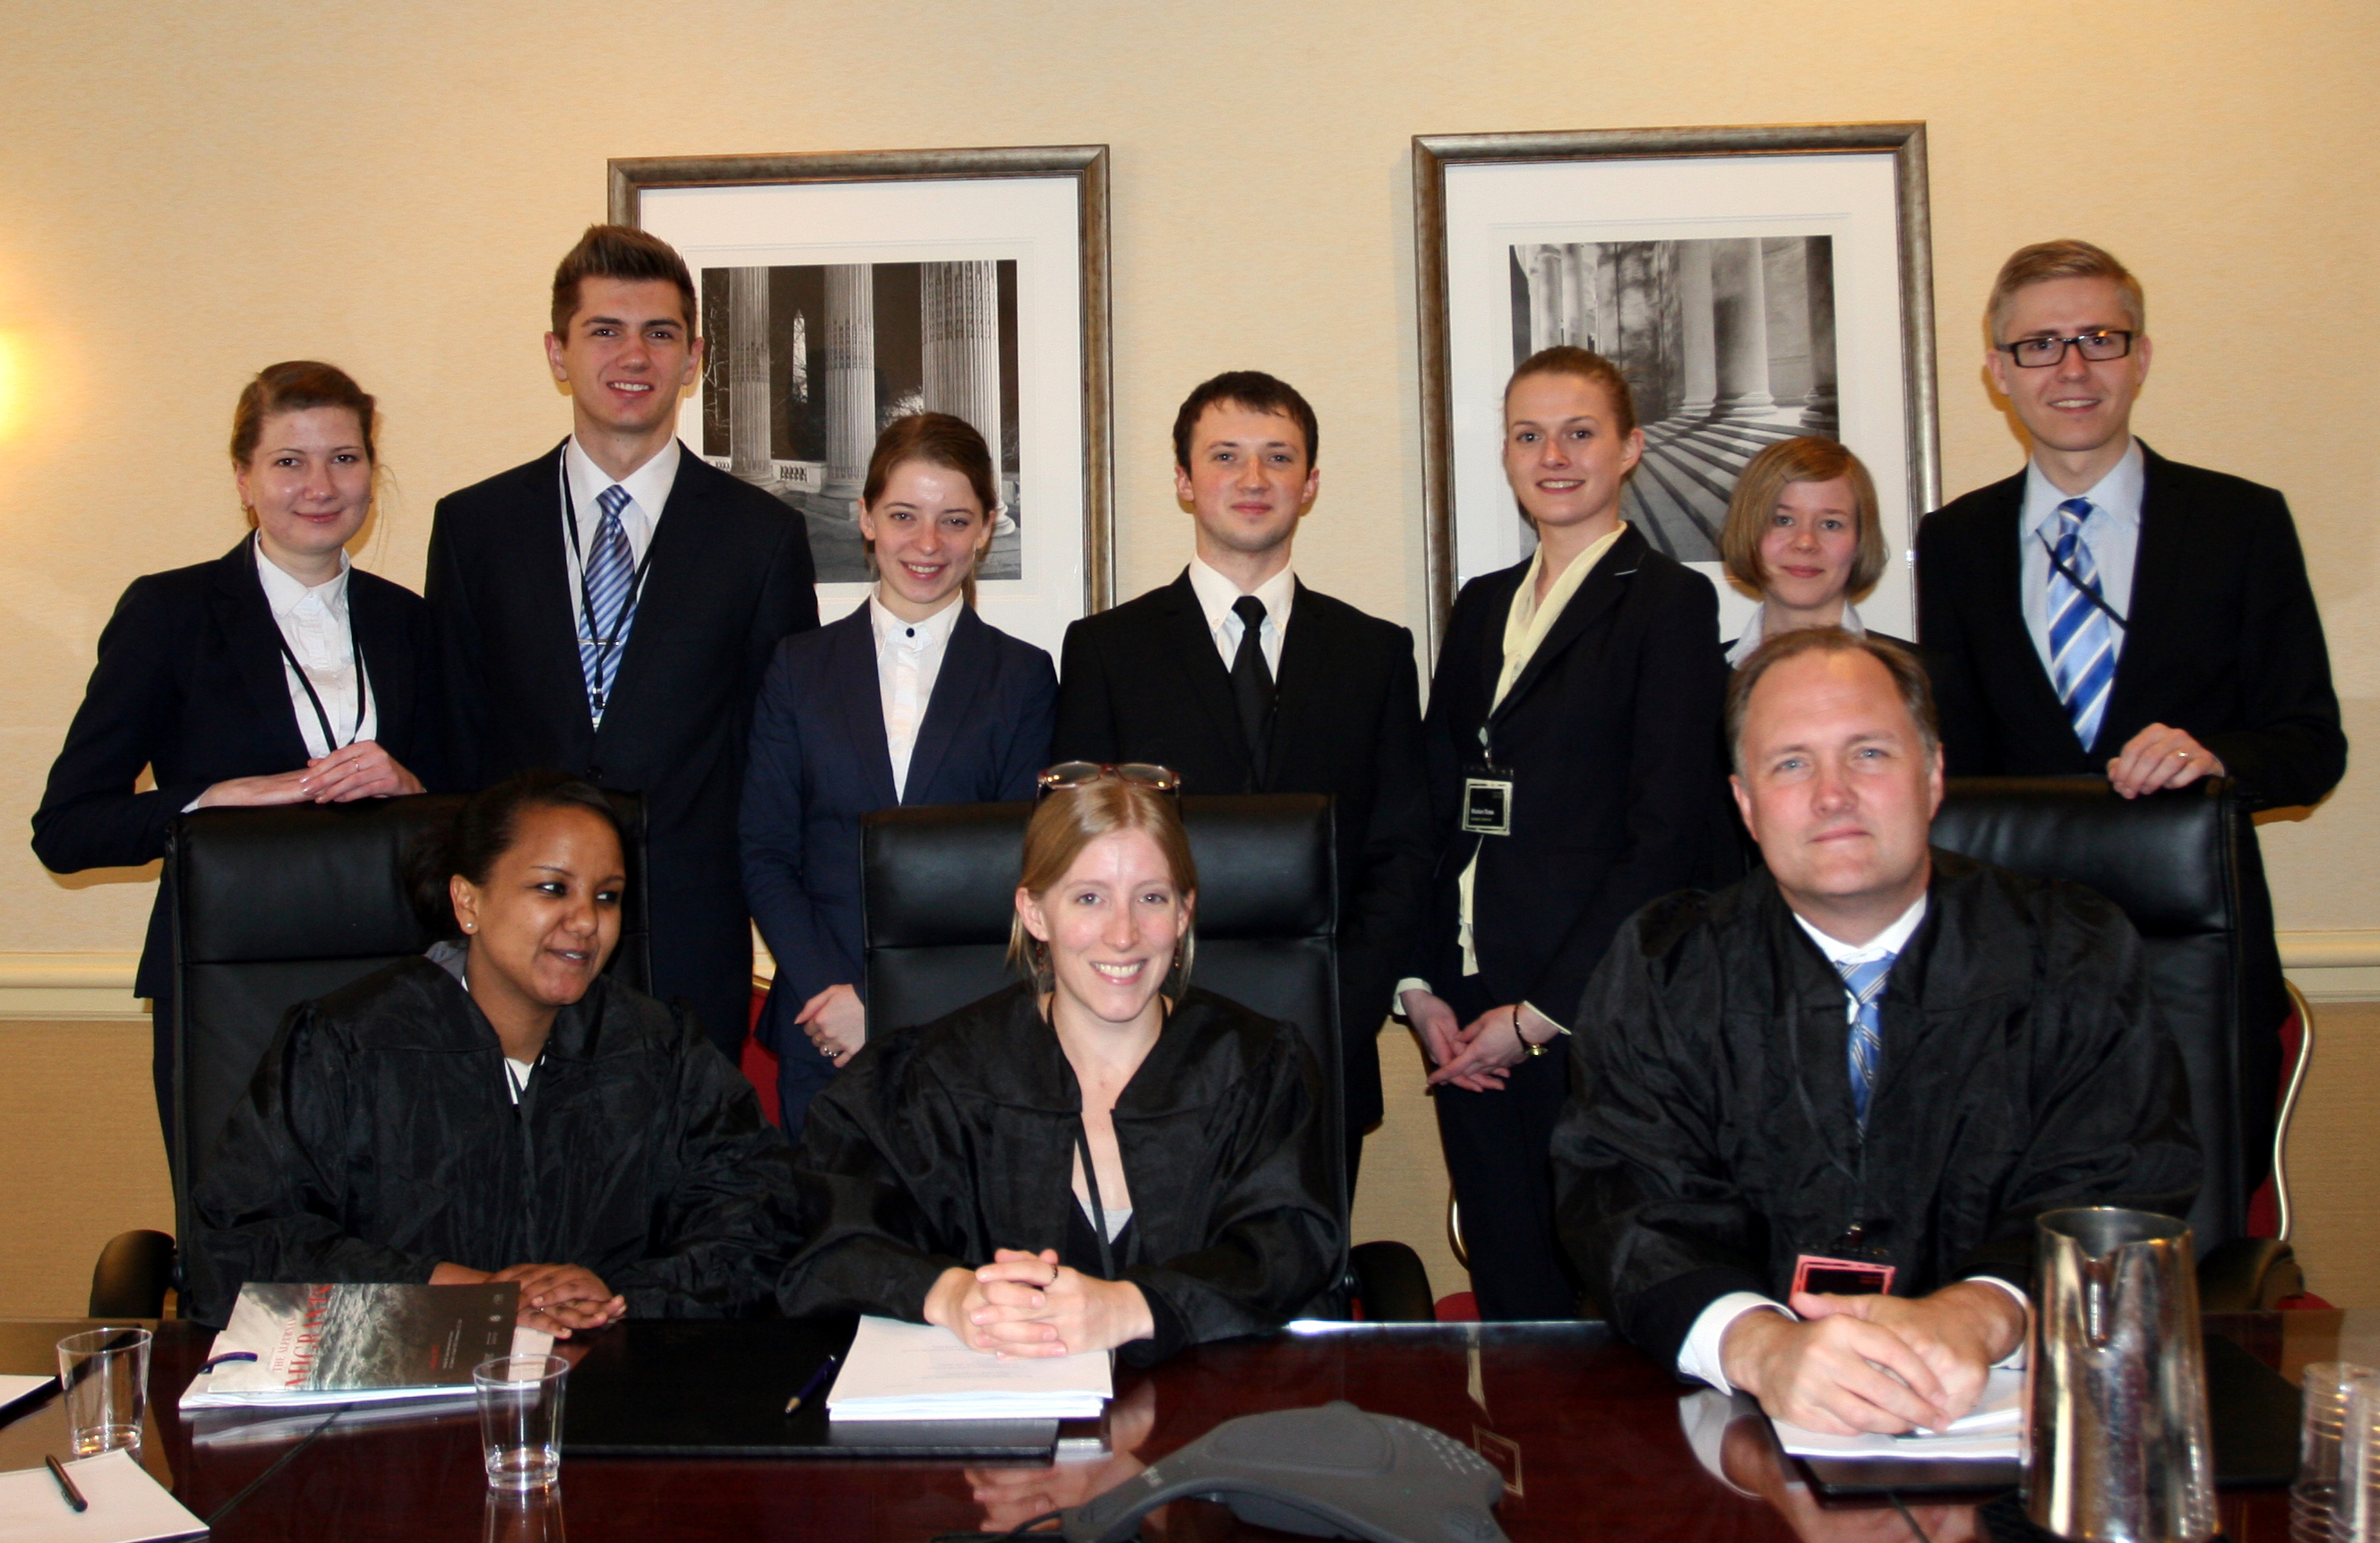 Orest during the Law Moot Court Session in Washington, DC